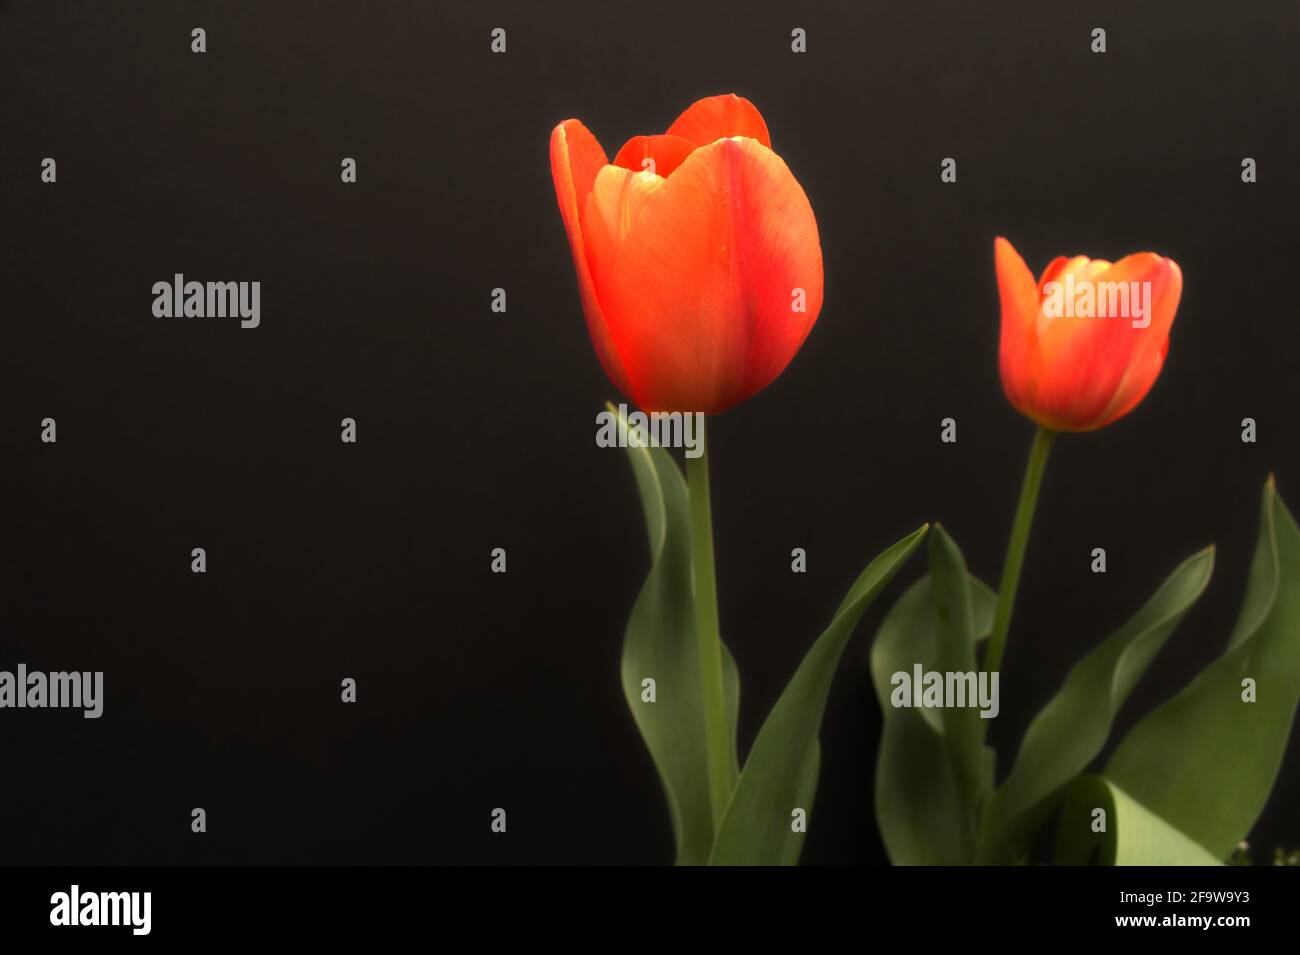 Tulips highlighted against a dark background. Stock Photo